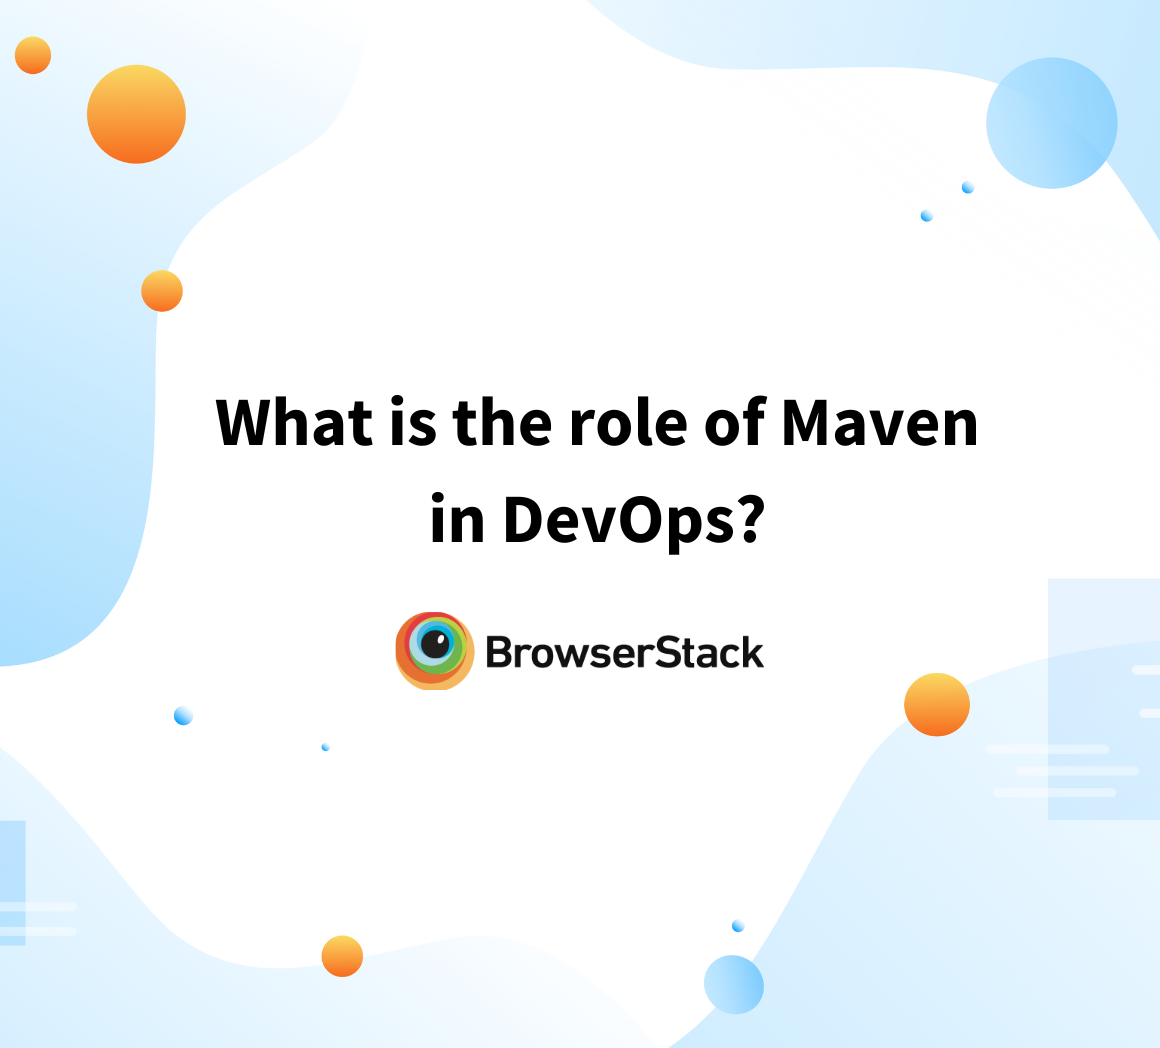 What is the role of Maven in DevOps